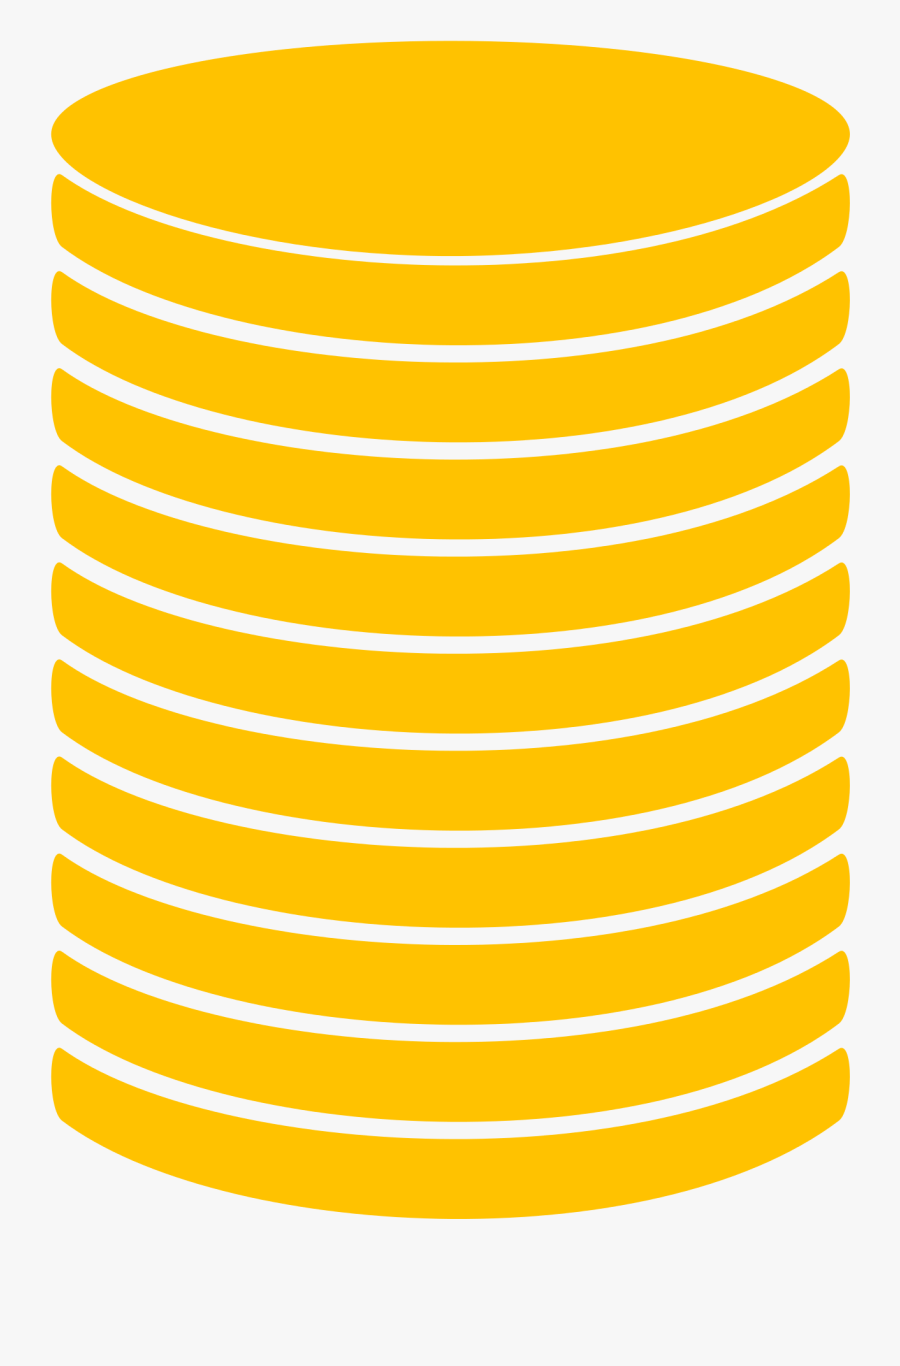 Coins Clipart Stacked Coin - Coin Stack Icon Transparent, Transparent Clipart